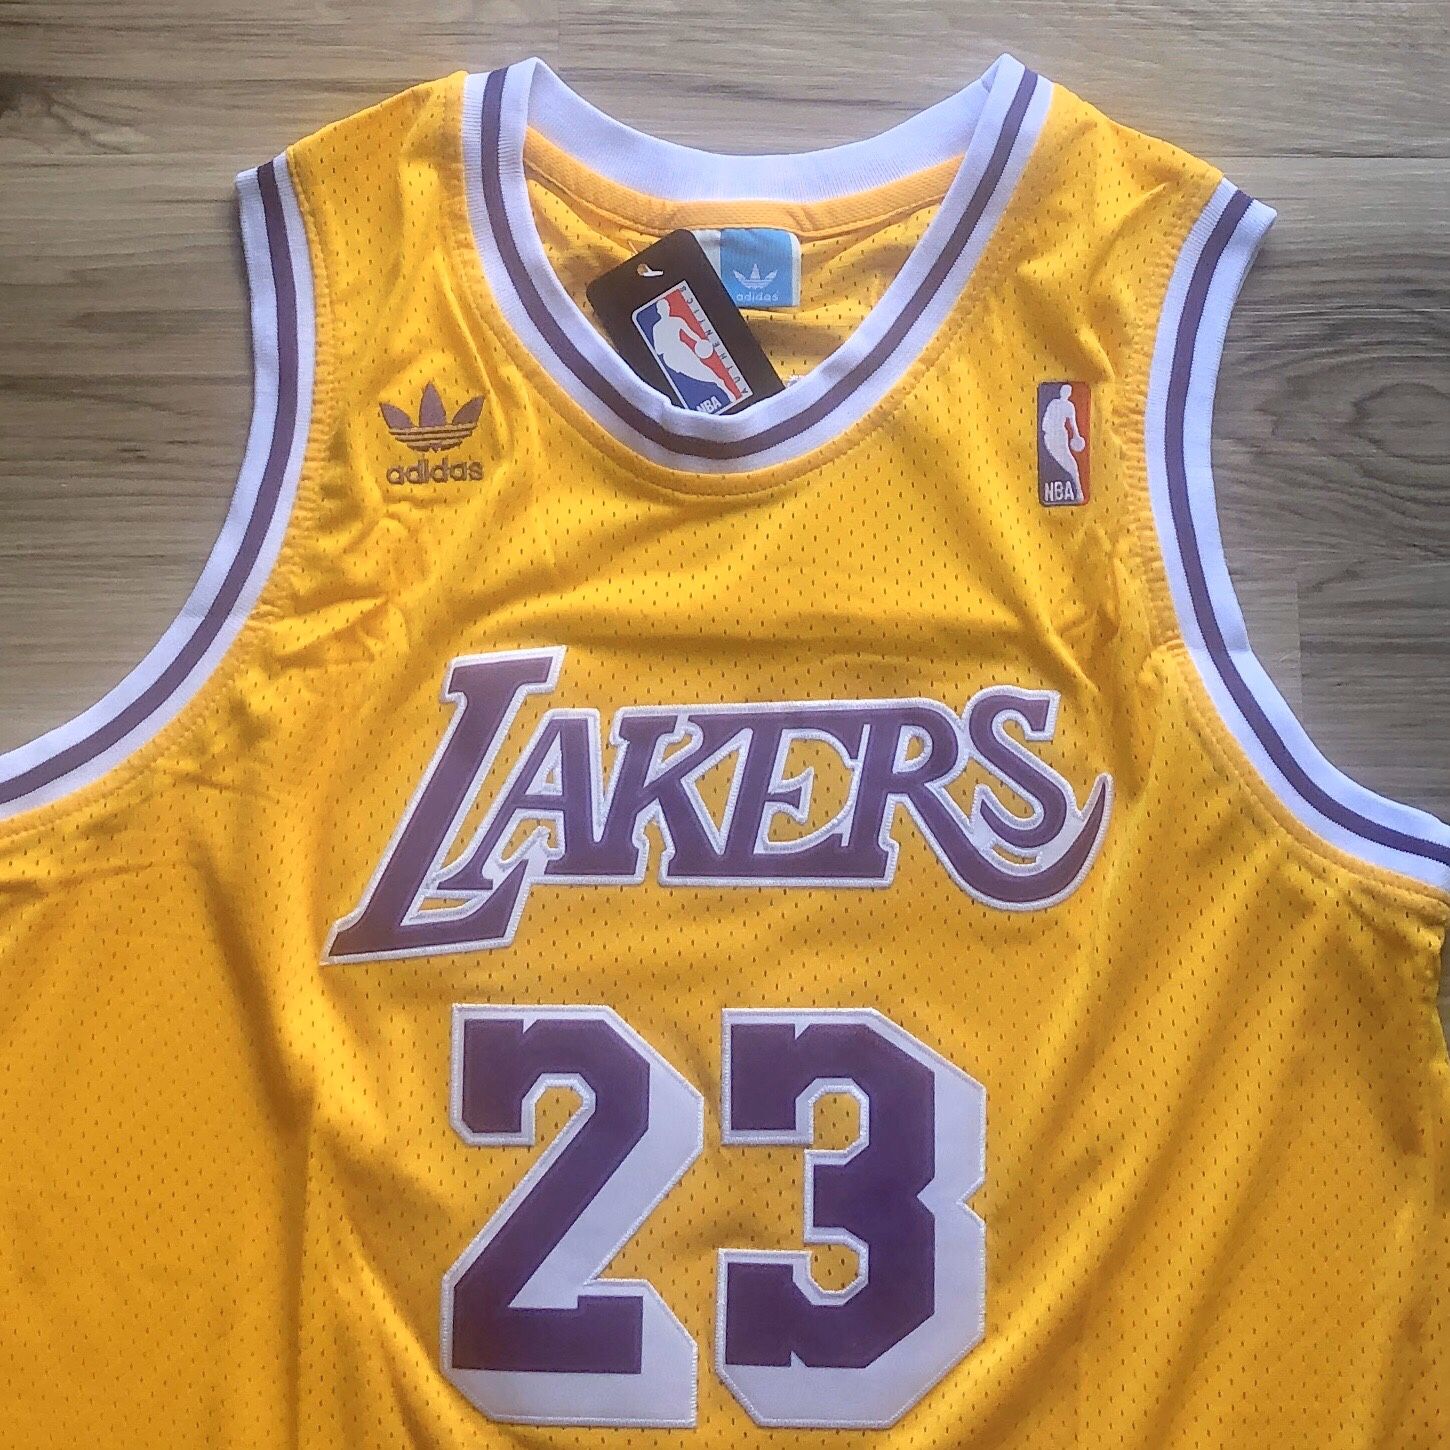 Authentic Lebron James Statement Jersey 22/23- W Bibigo Patch (Large) for  Sale in Los Angeles, CA - OfferUp